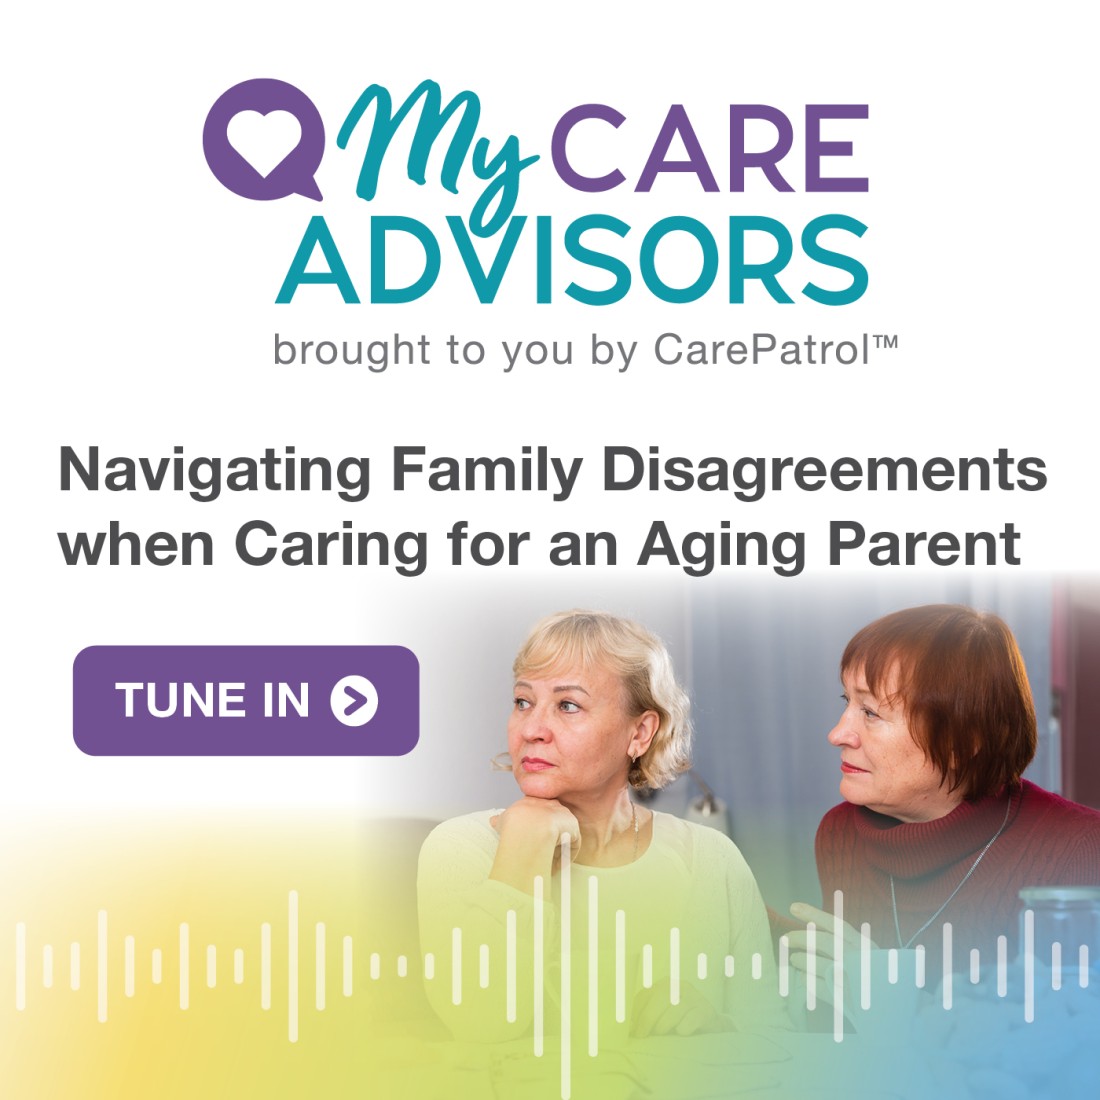 Senior Care Advisors Resources | Senior Care Solutions - Social_Media_Graphic__Navigating_Family_Disagreements_when_Caring_for_an_Aging_Parent